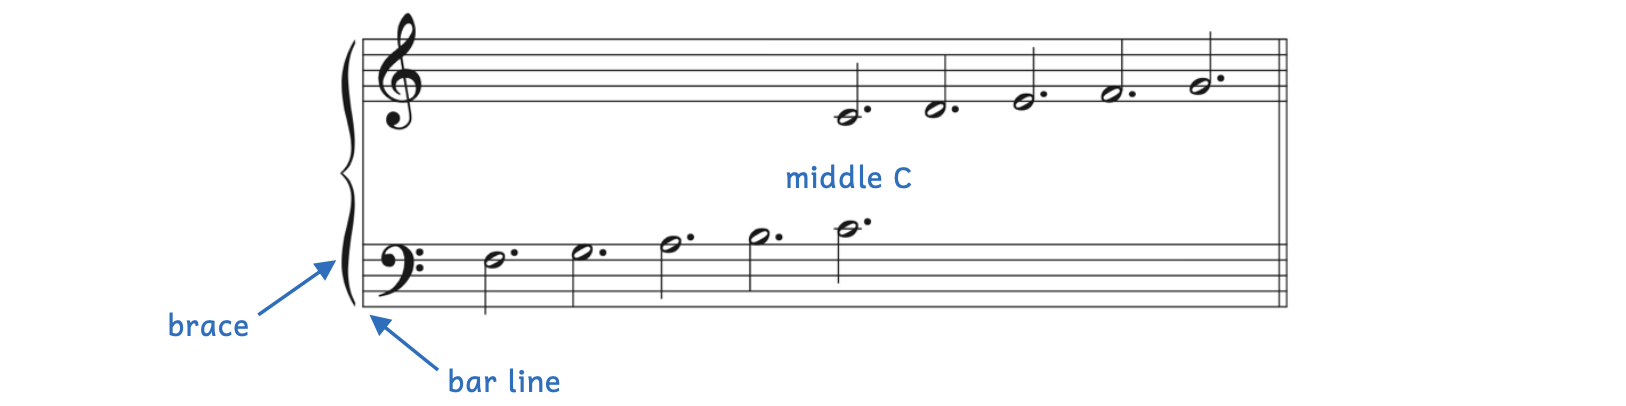 Illustration of grand staff, which is the treble clef and the bass clef at the same time, connected by a brace and bar line. The half notes on the grand staff ascend, beginning on the F on the fourth line in the bass clef. Middle C is shown simultaneously in both clefs. The dotted half notes ascend until G on the second line in the treble clef.